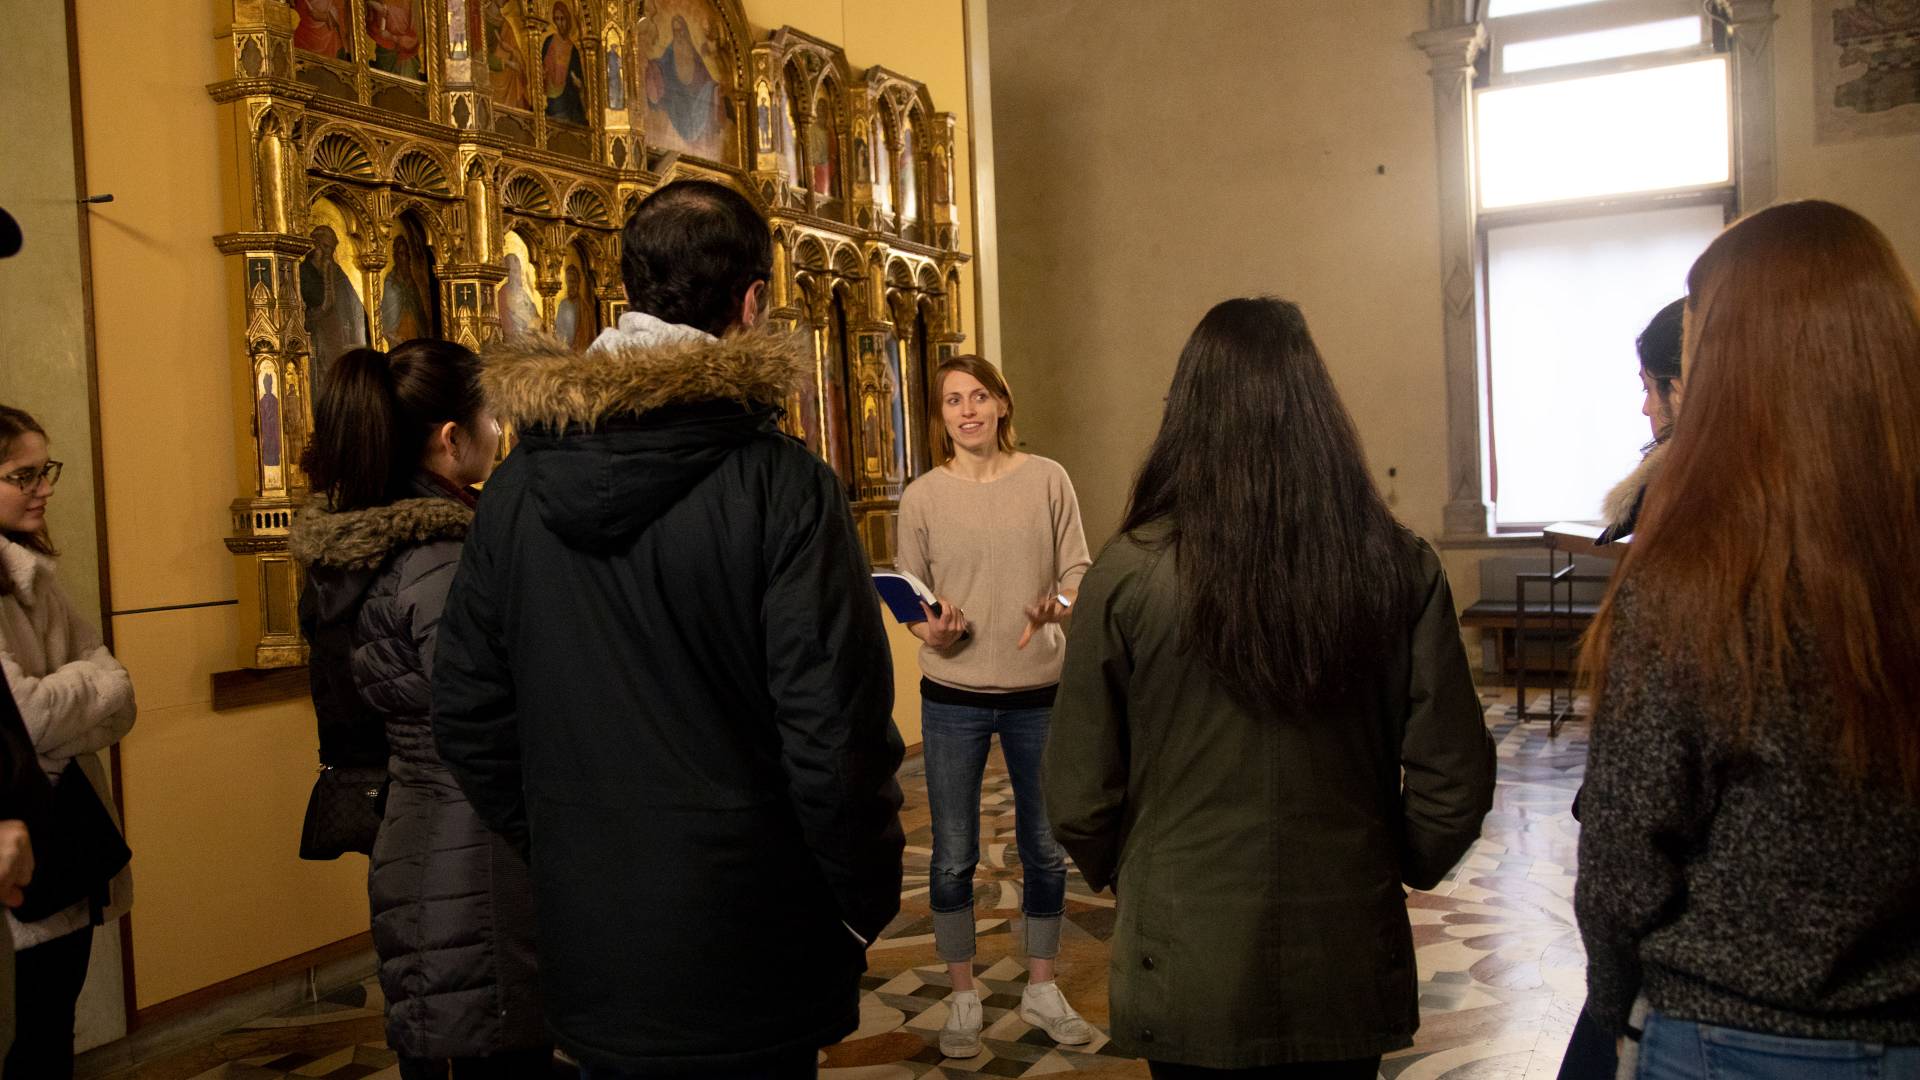 Jamie Reuland with students in Gallerie dell'Accademia in Venice